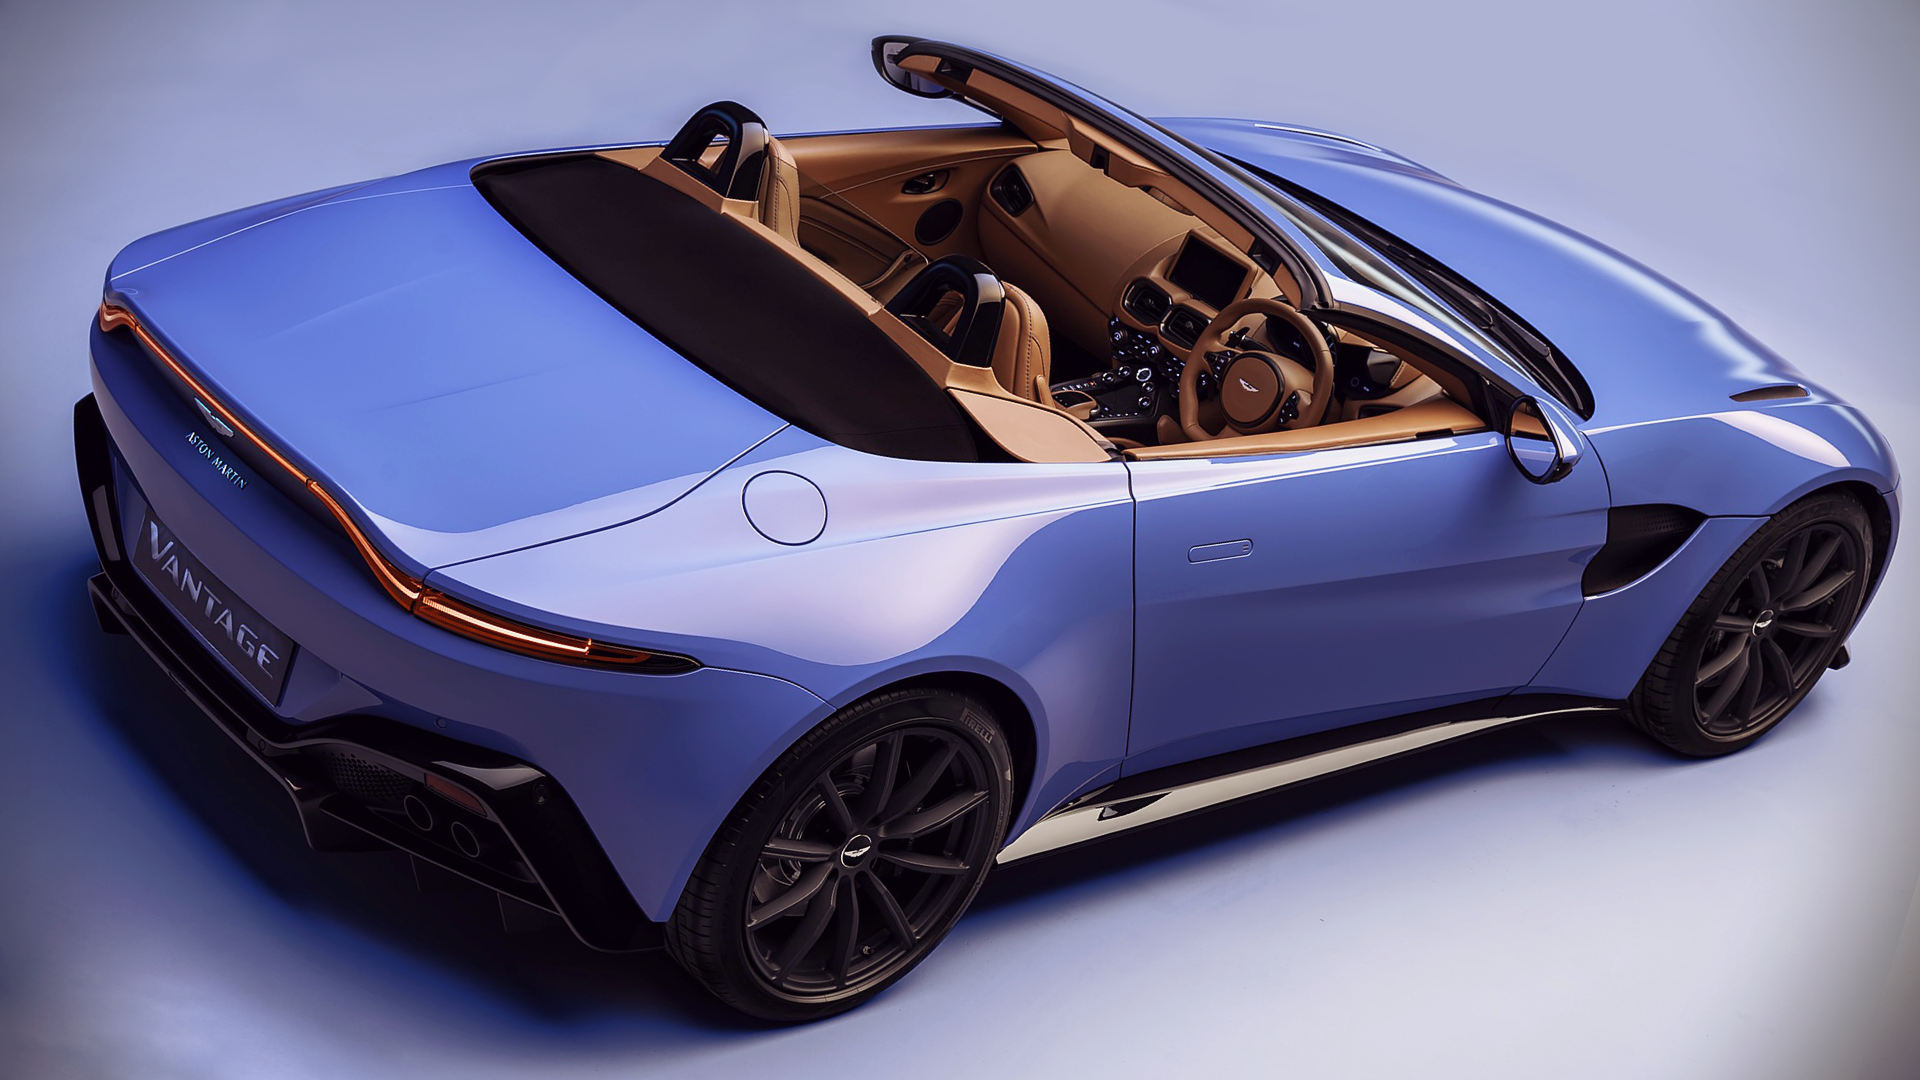 This Just In: Aston Martin Vantage Roadster Revealed for 2021 - Starr